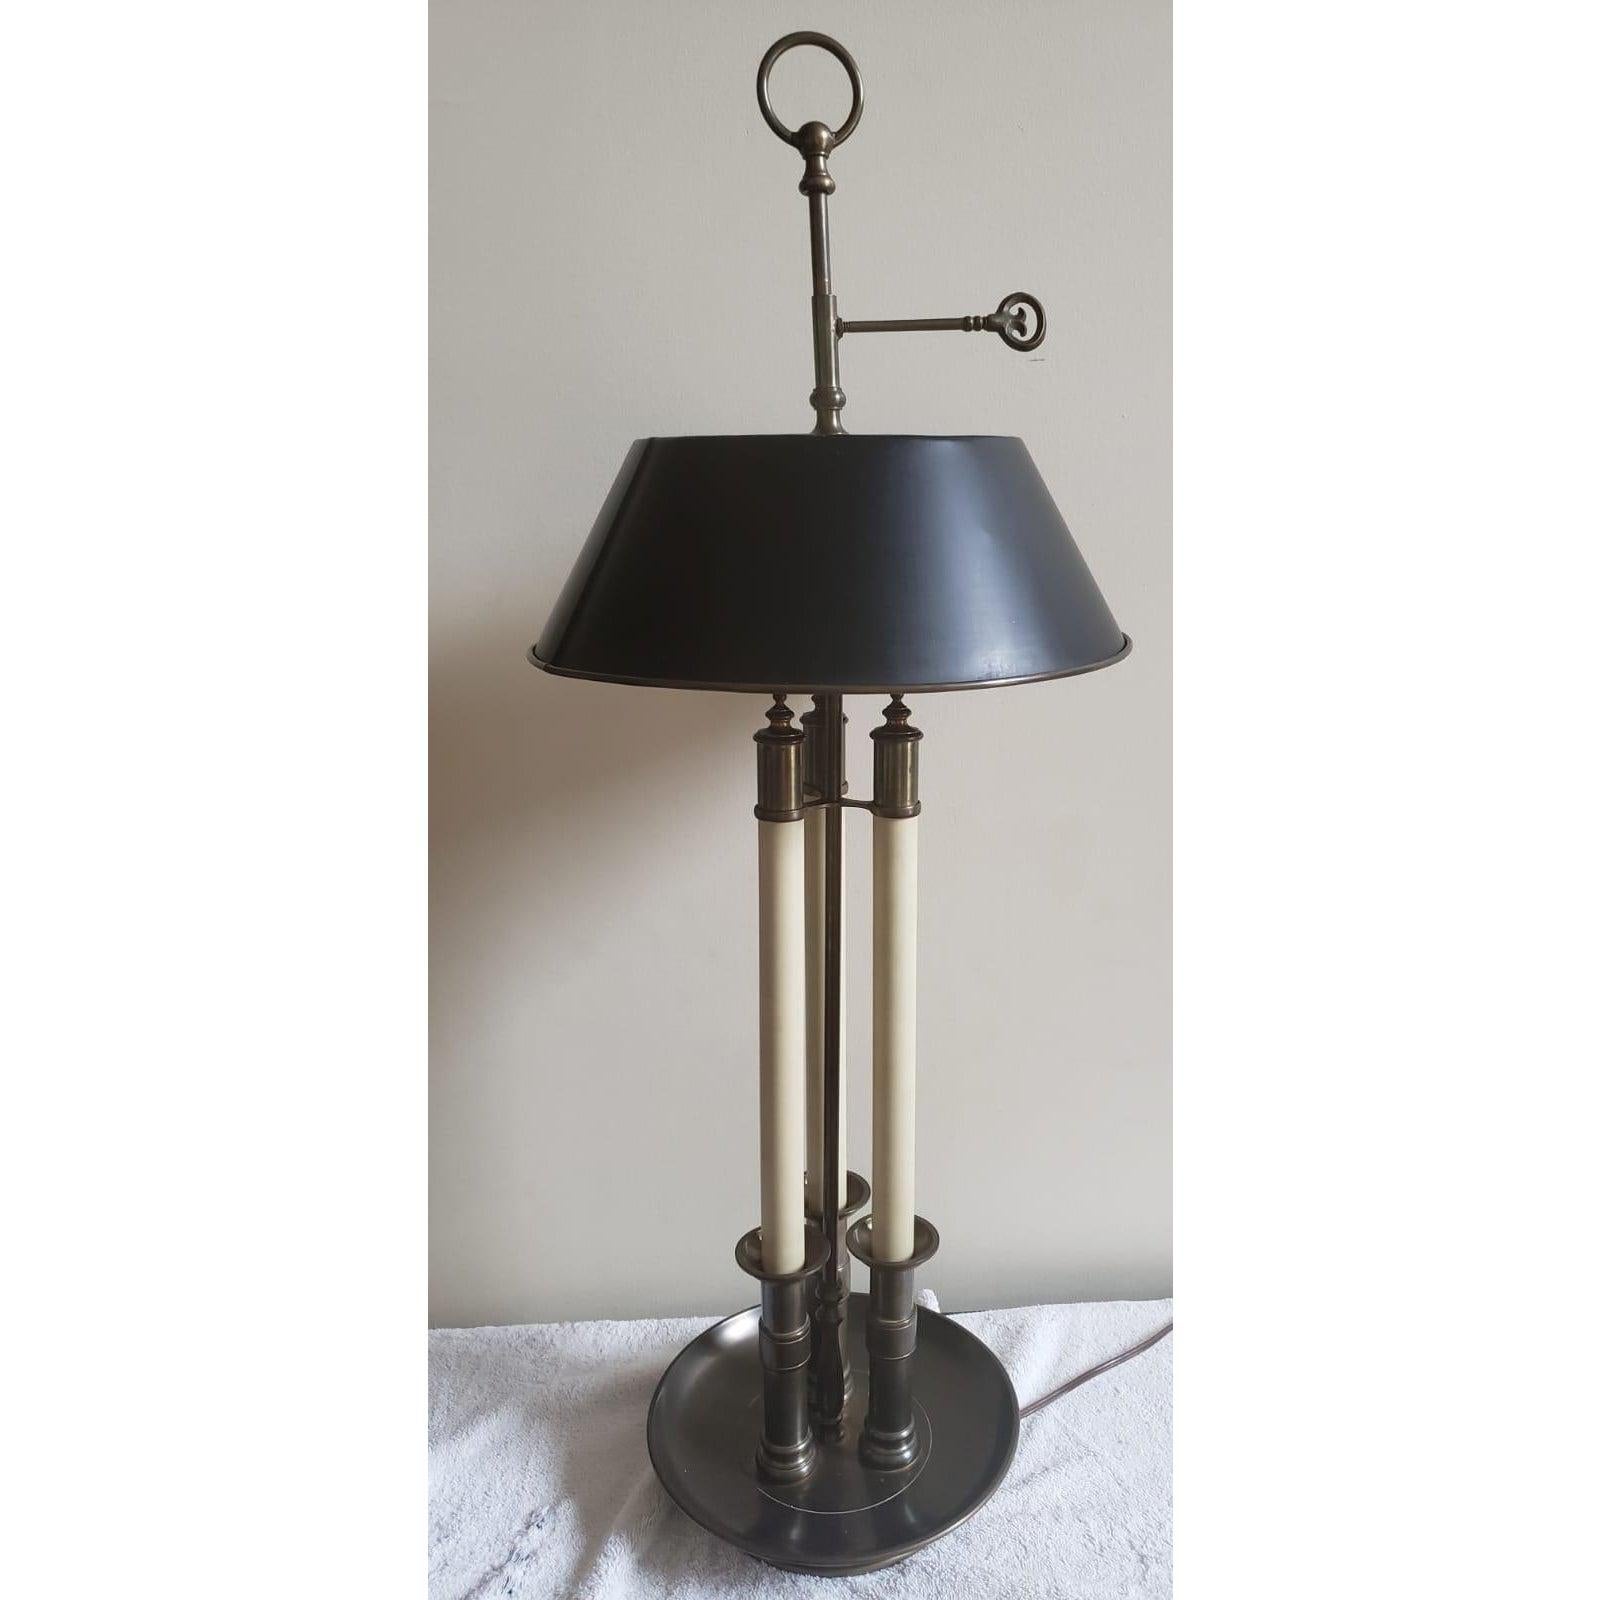 1972 Chapman solid brass Bouillotte lamp with tole shade. Base 9.5